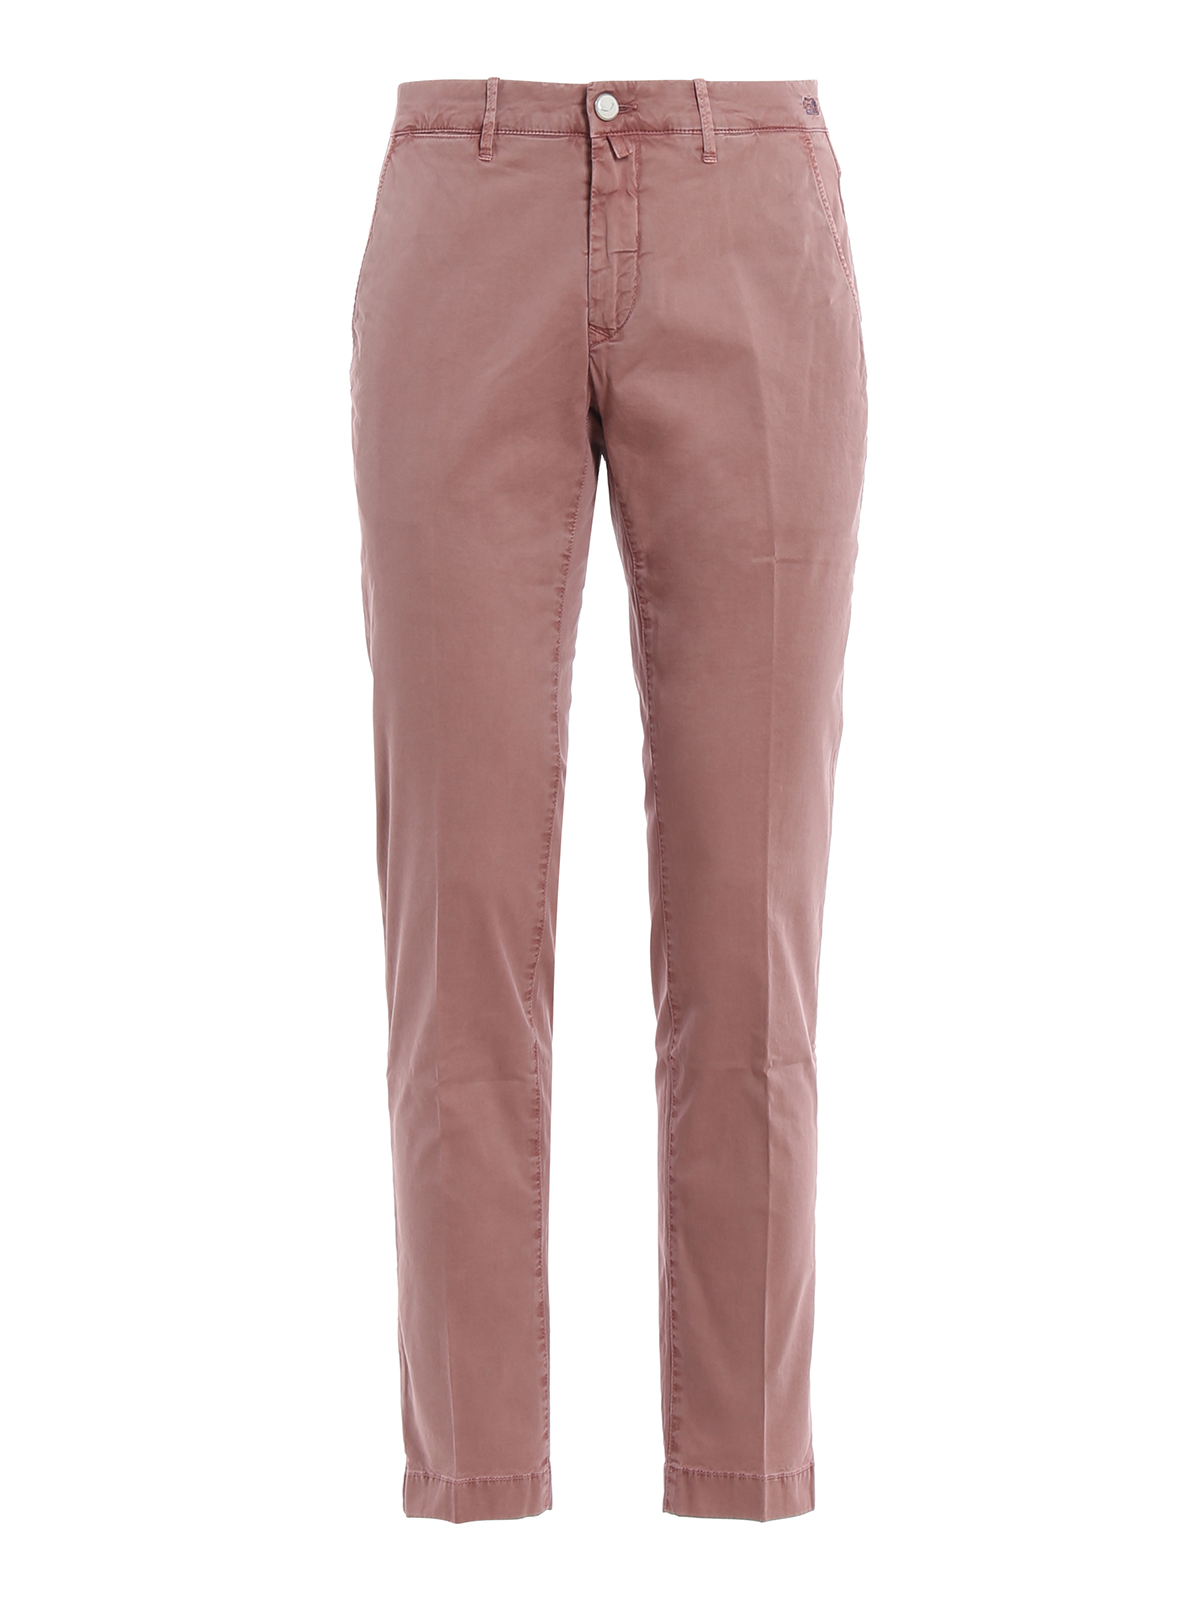 Jacob Cohen Lion Pink Chino Trousers